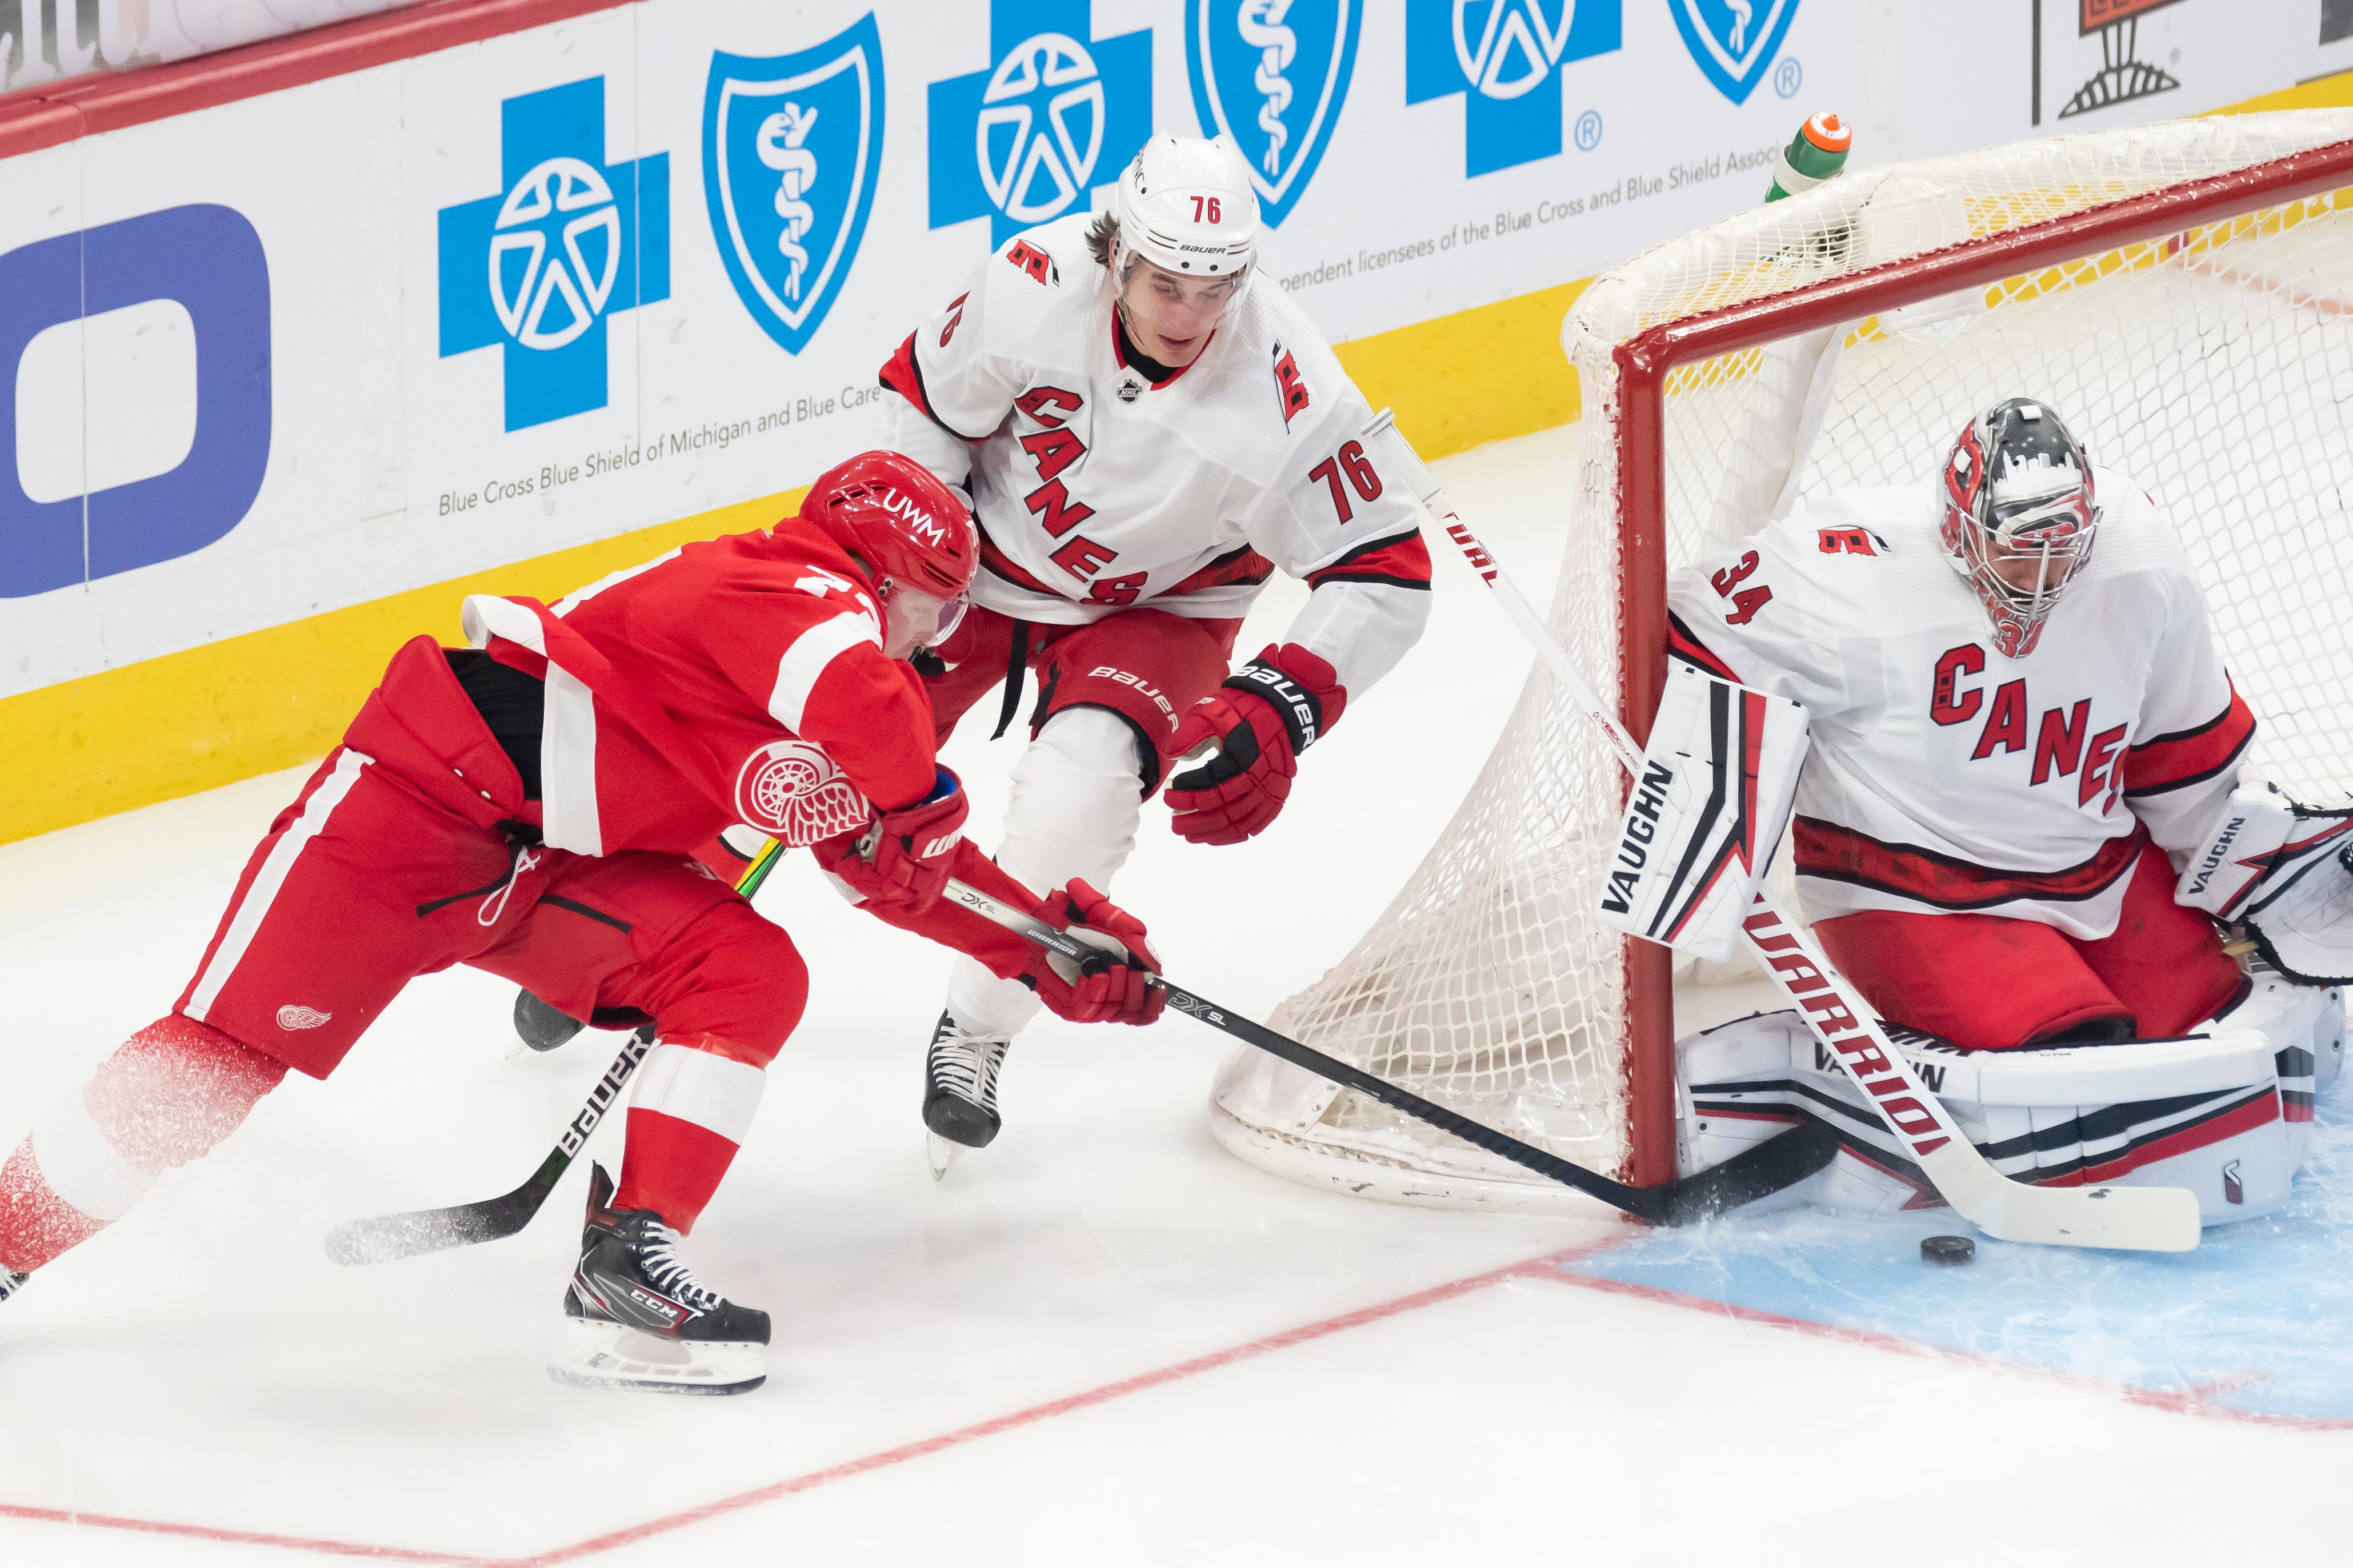 Detroit left wing Adam Erne, left, tries to get the puck past Carolina defenseman Brady Skjei and goaltender Petr Mrazek in the first period during a game between the Detroit Red Wings and the Carolina Hurricanes, at Little Caesars Arena, in Detroit, January 14, 2021.